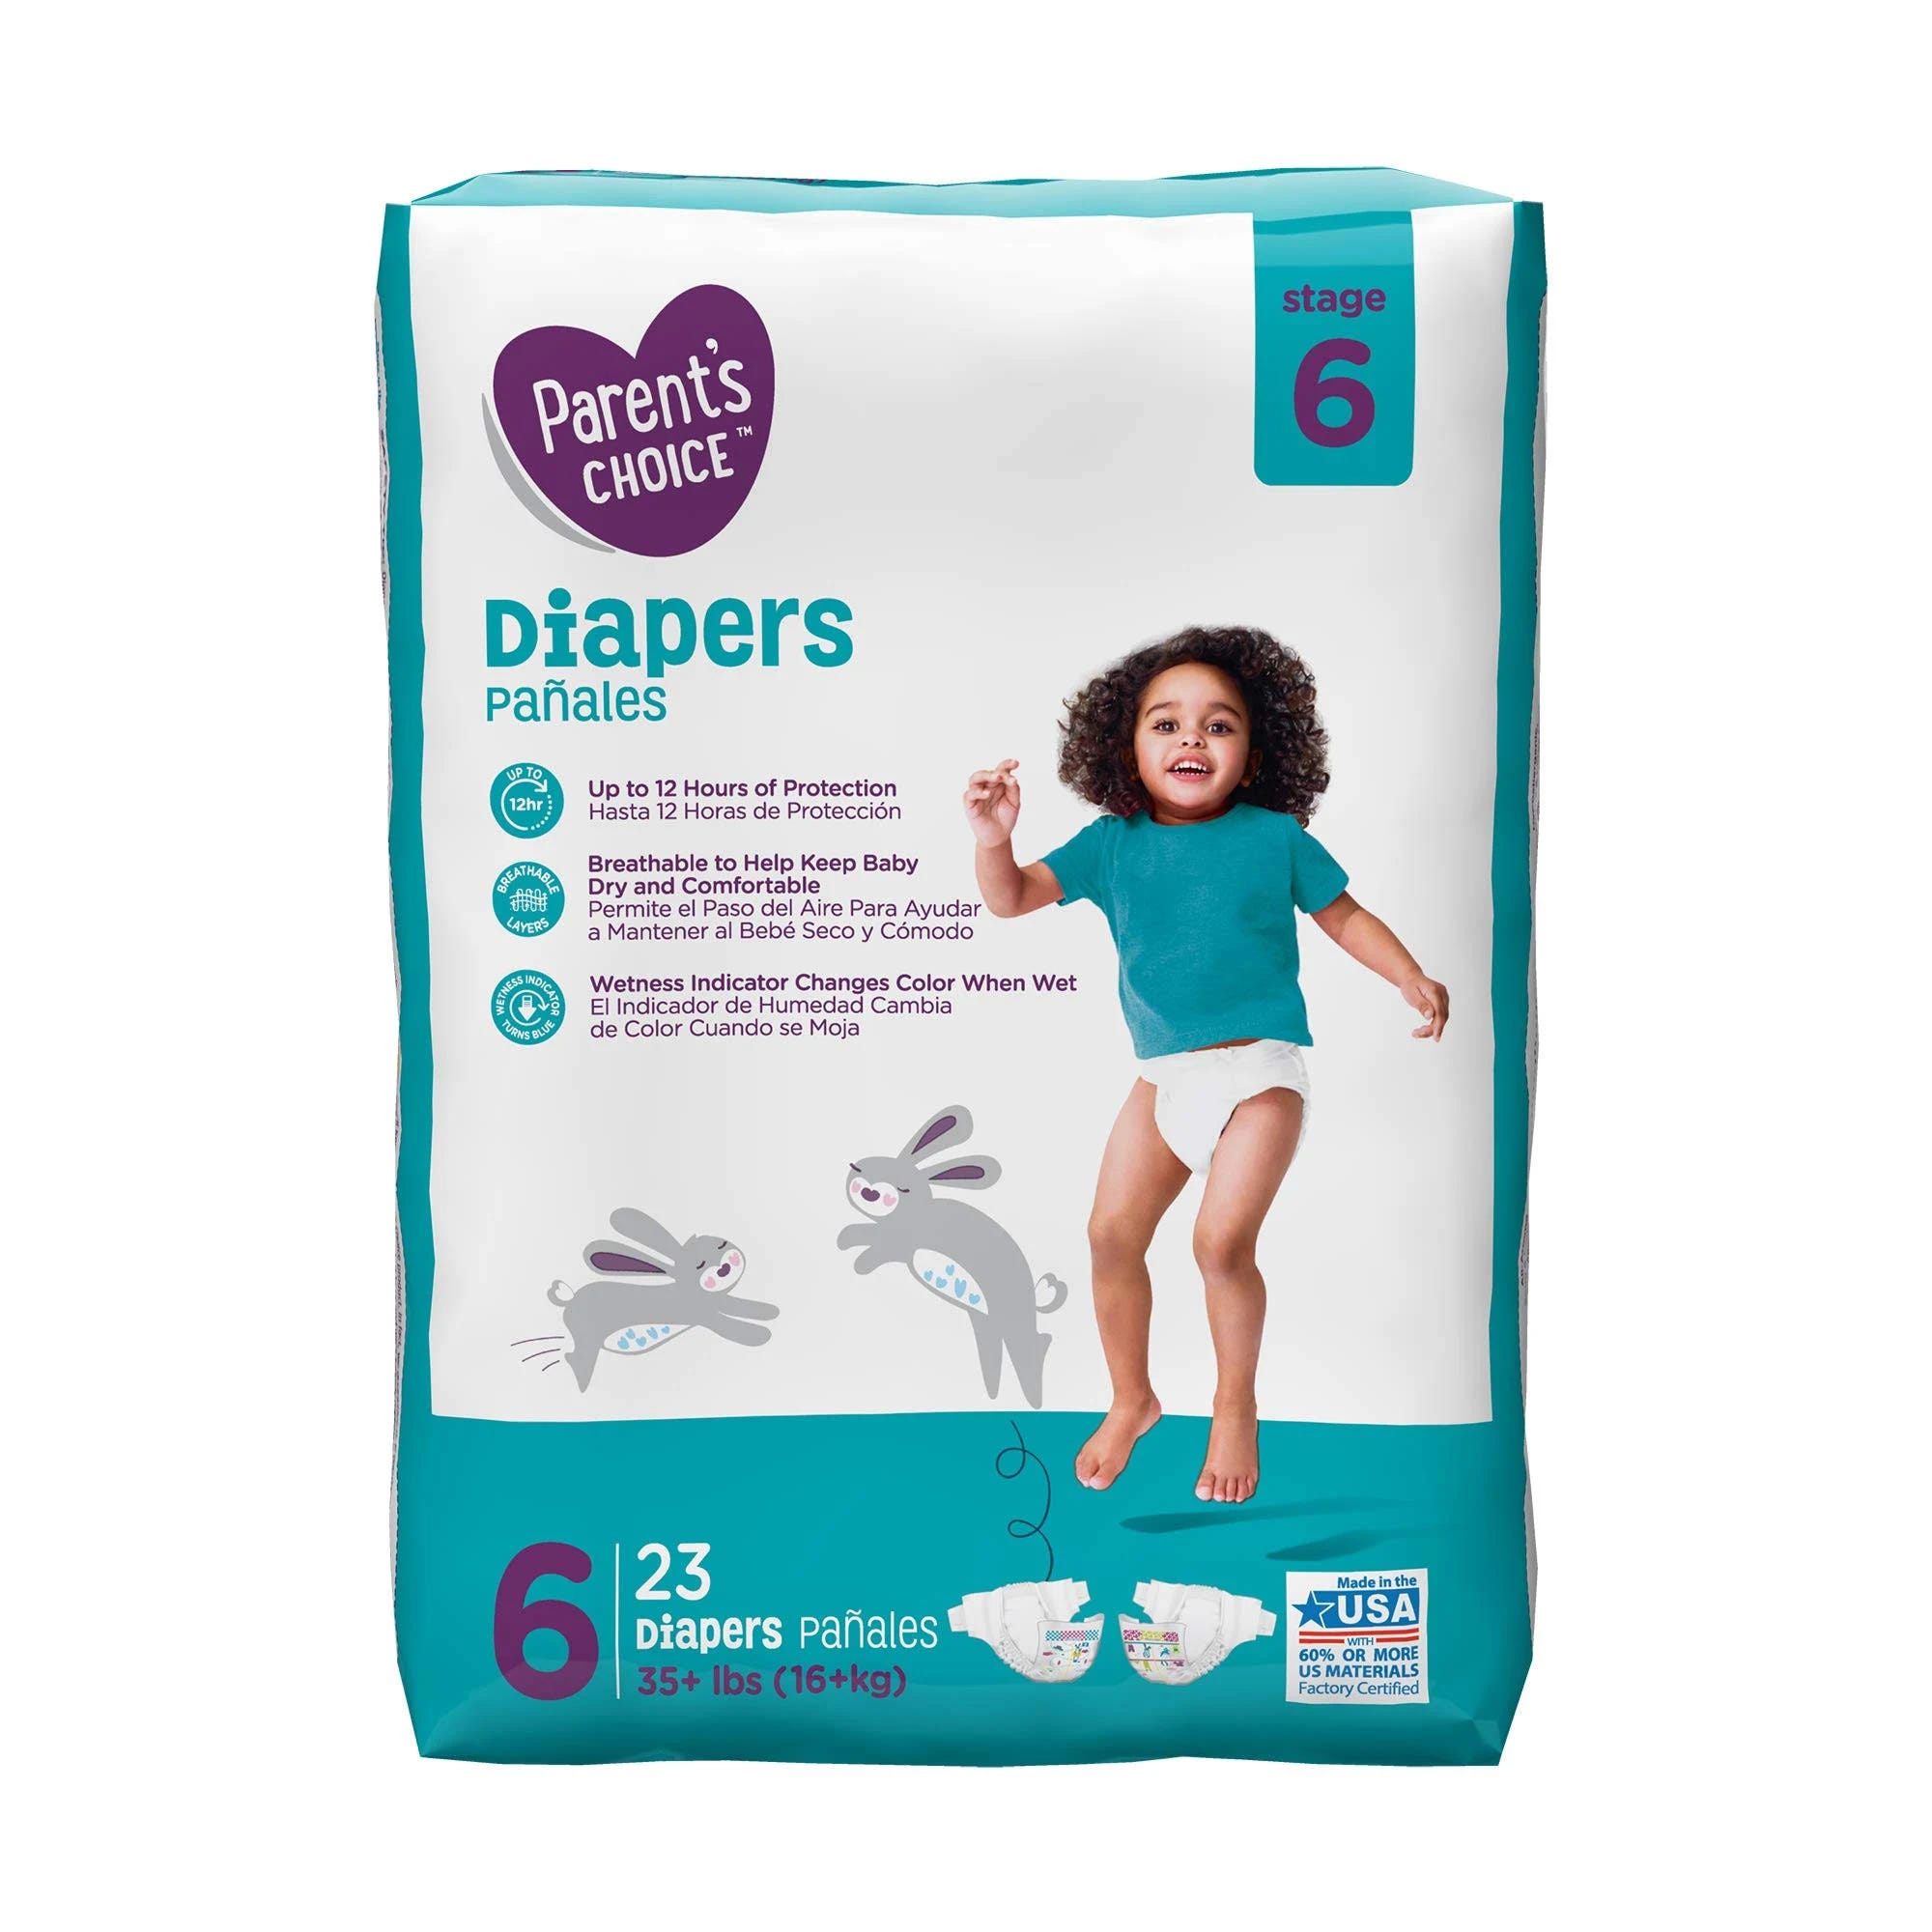 Parent's Choice Diapers: Comfortable and Hypoallergenic for Babies | Image